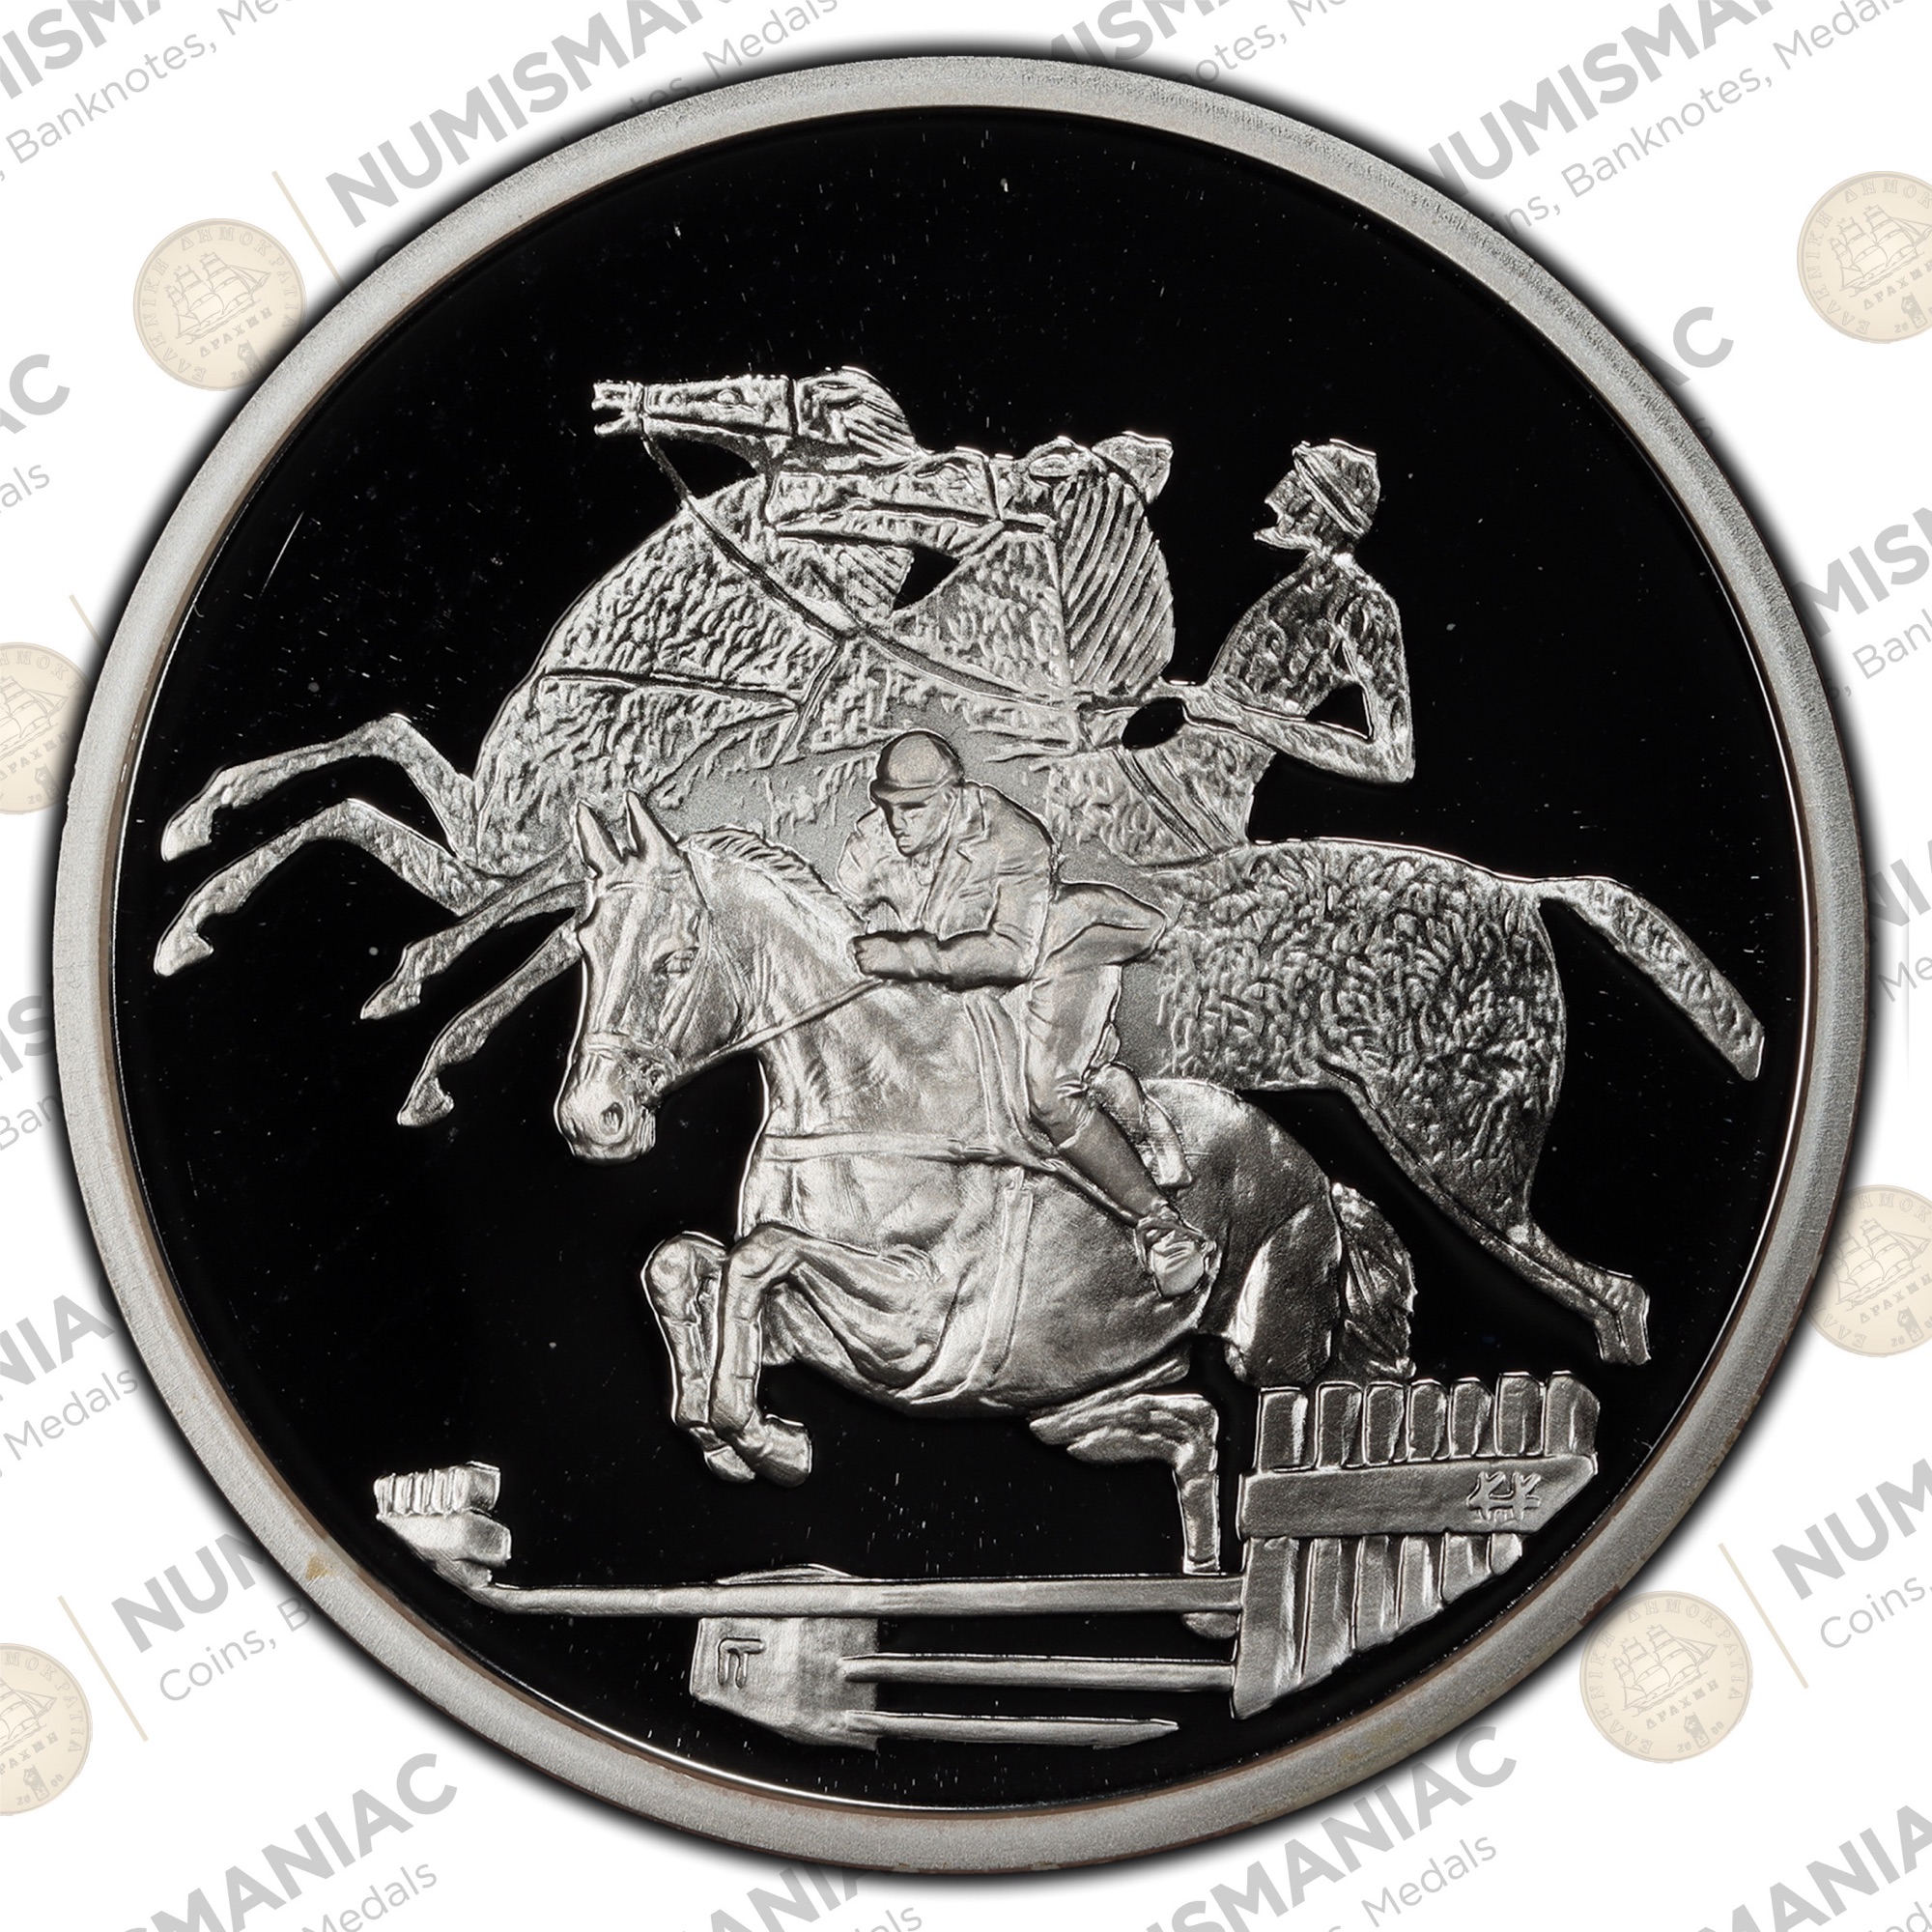 Greece 🇬🇷 10 Euro 2003 "Equestrian" 1oz Silver Bullion Proof Coin with capsule. A